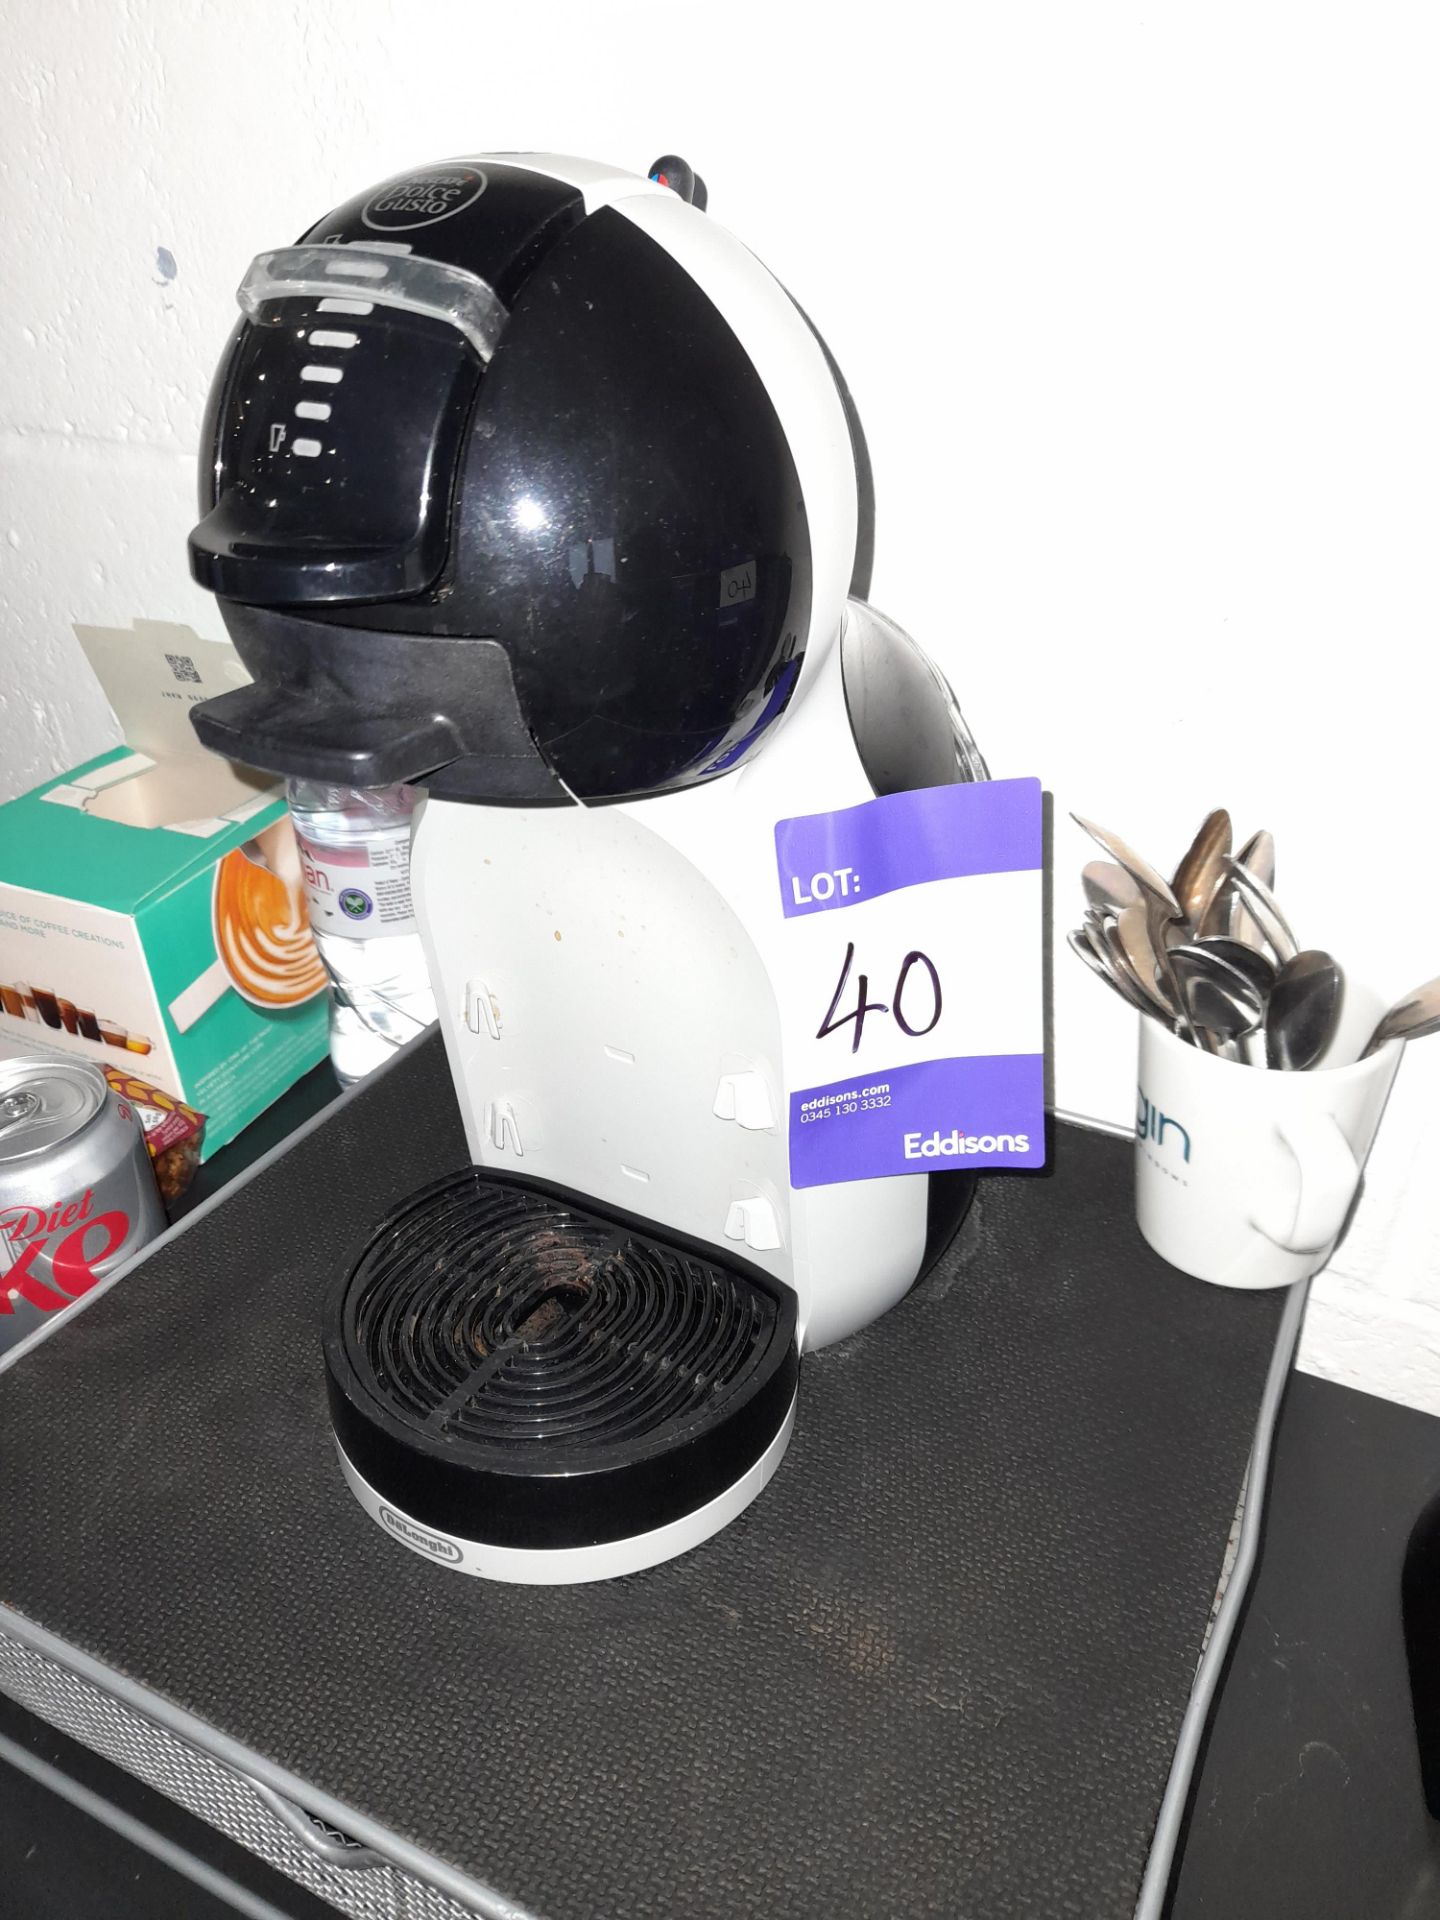 DeLonghi Nescafe Dolce Gusto coffee machine, and Breville hot water machine - Image 2 of 3